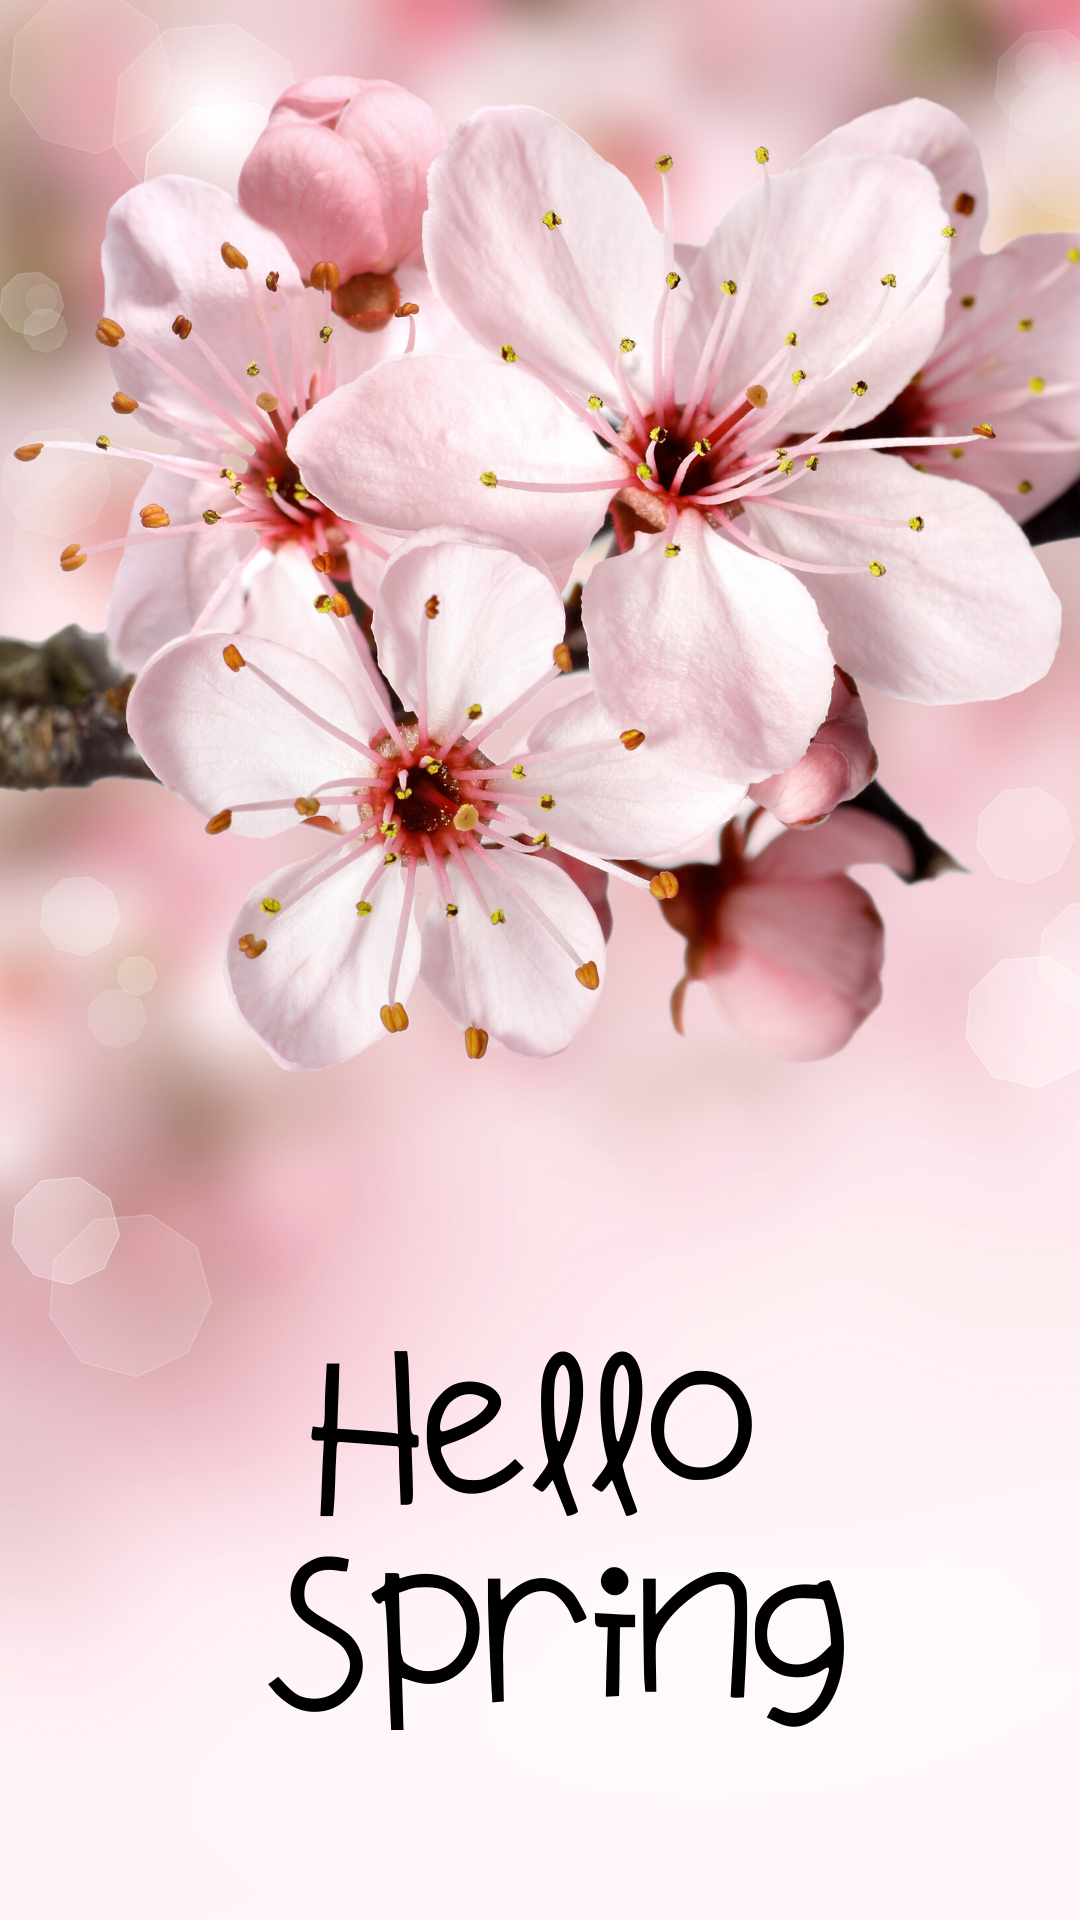 1080x1920 Spring Wallpaper for Your Phone | Spring wallpaper, Hello spring wallpaper, Beautiful wallpaper for phone